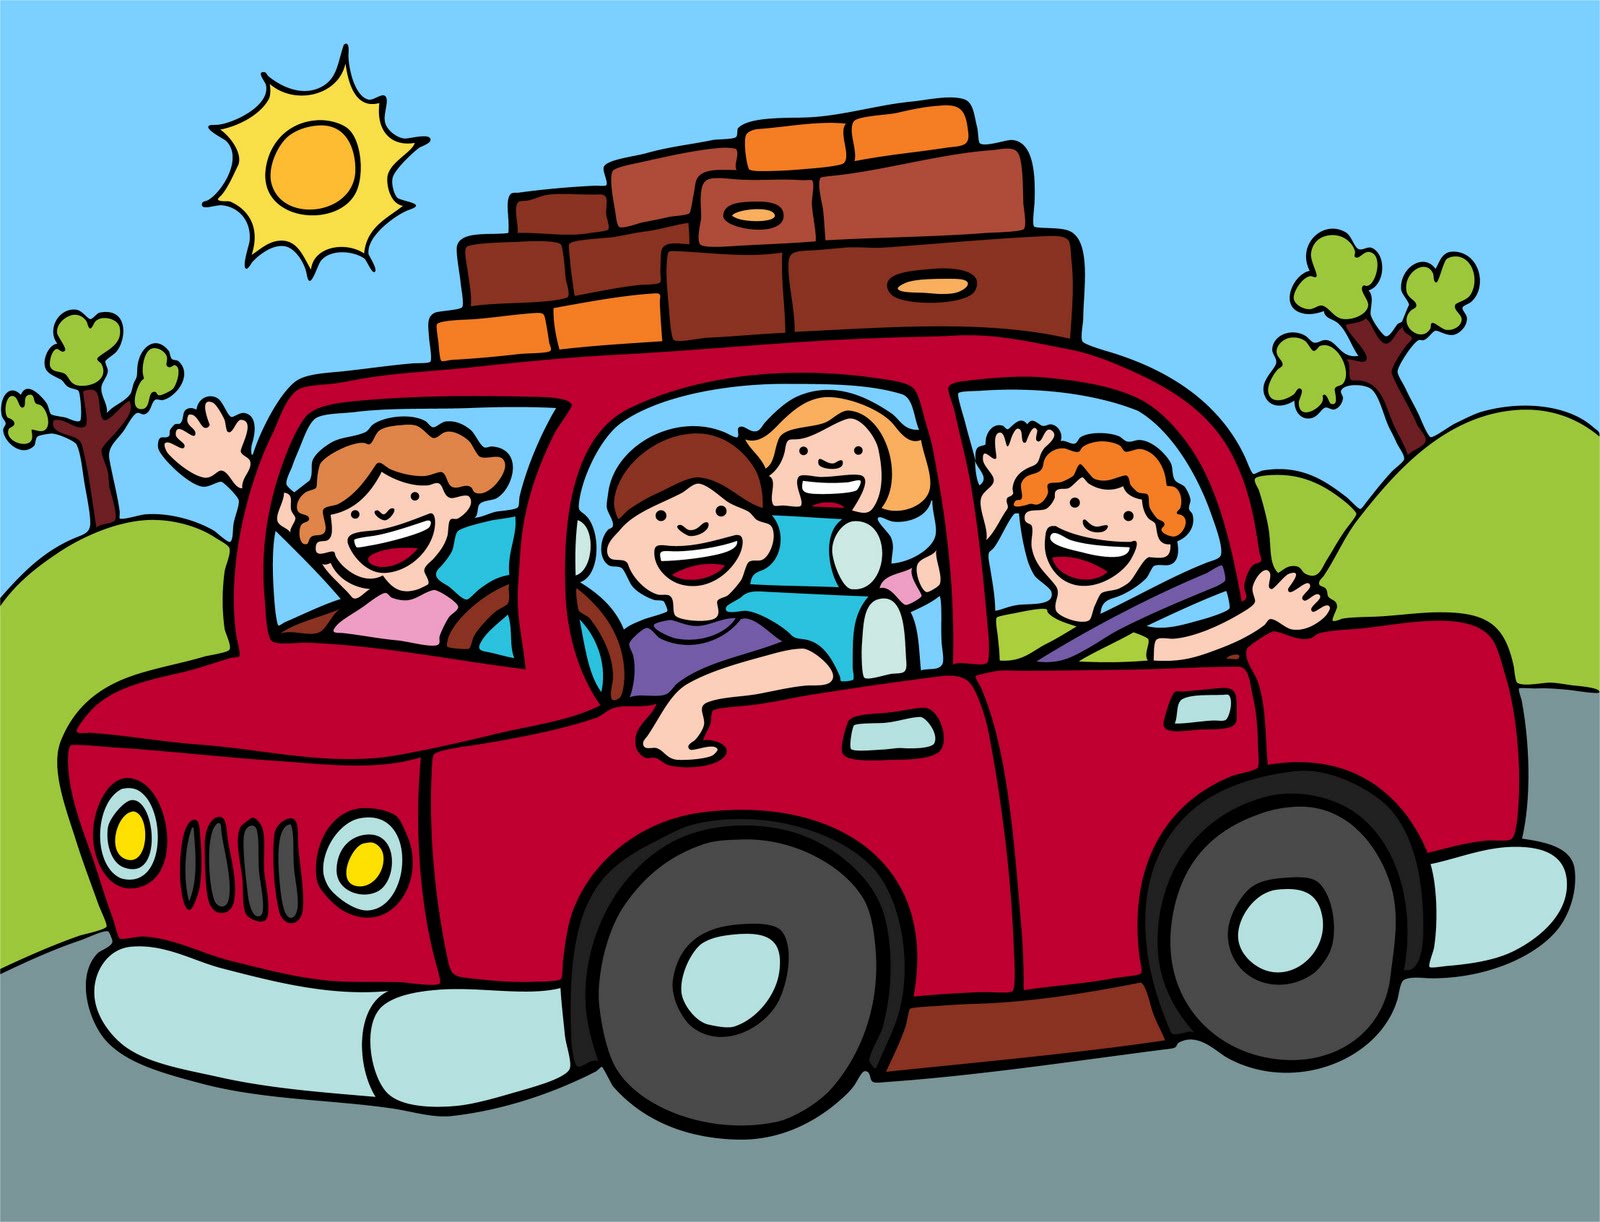 traveling clipart kid travel